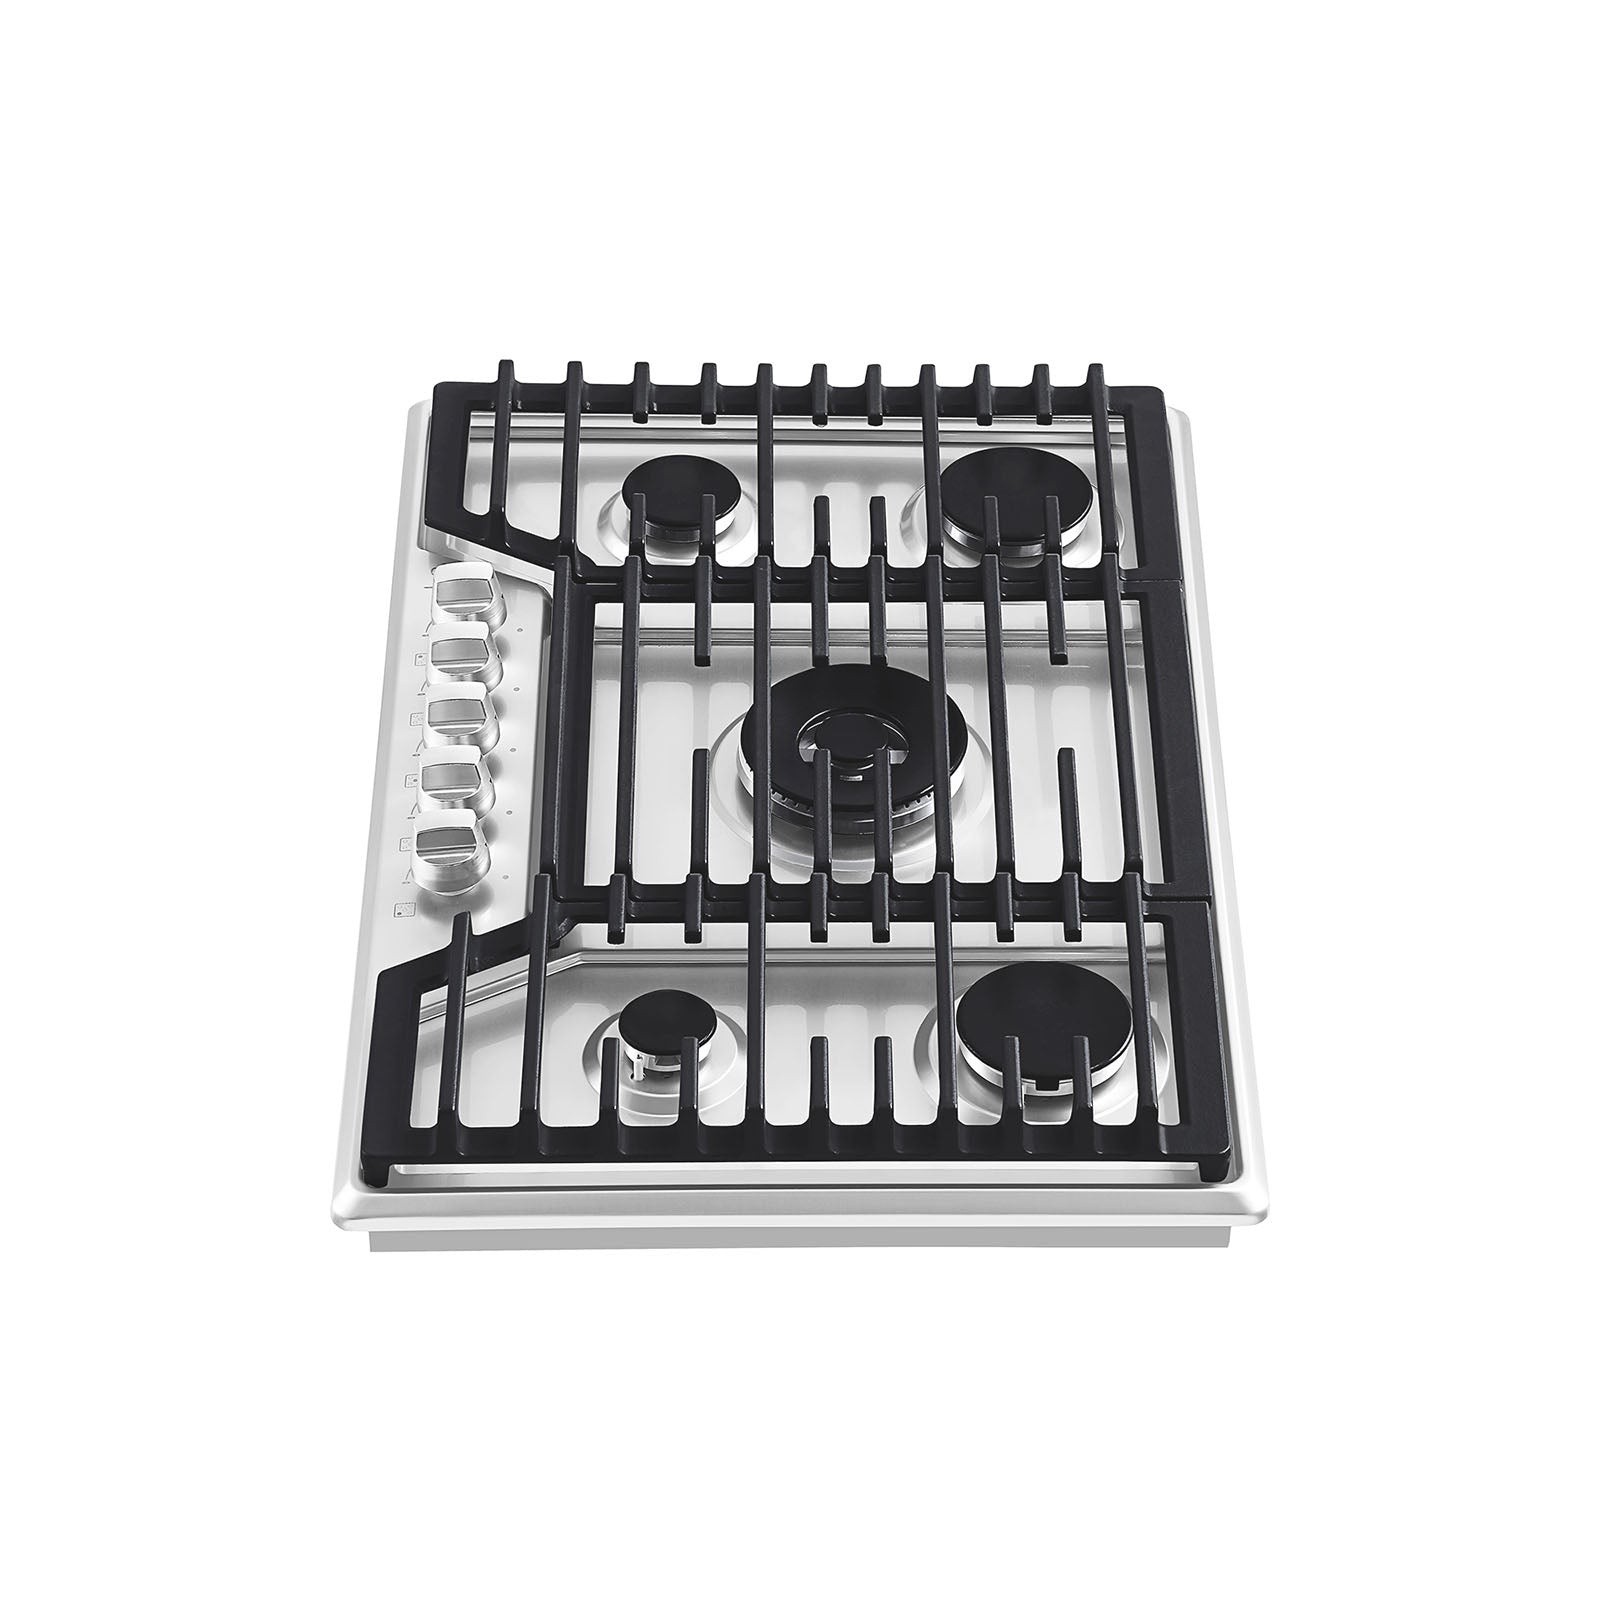 Empava 30-in. Built-in Gas Stove Cooktop